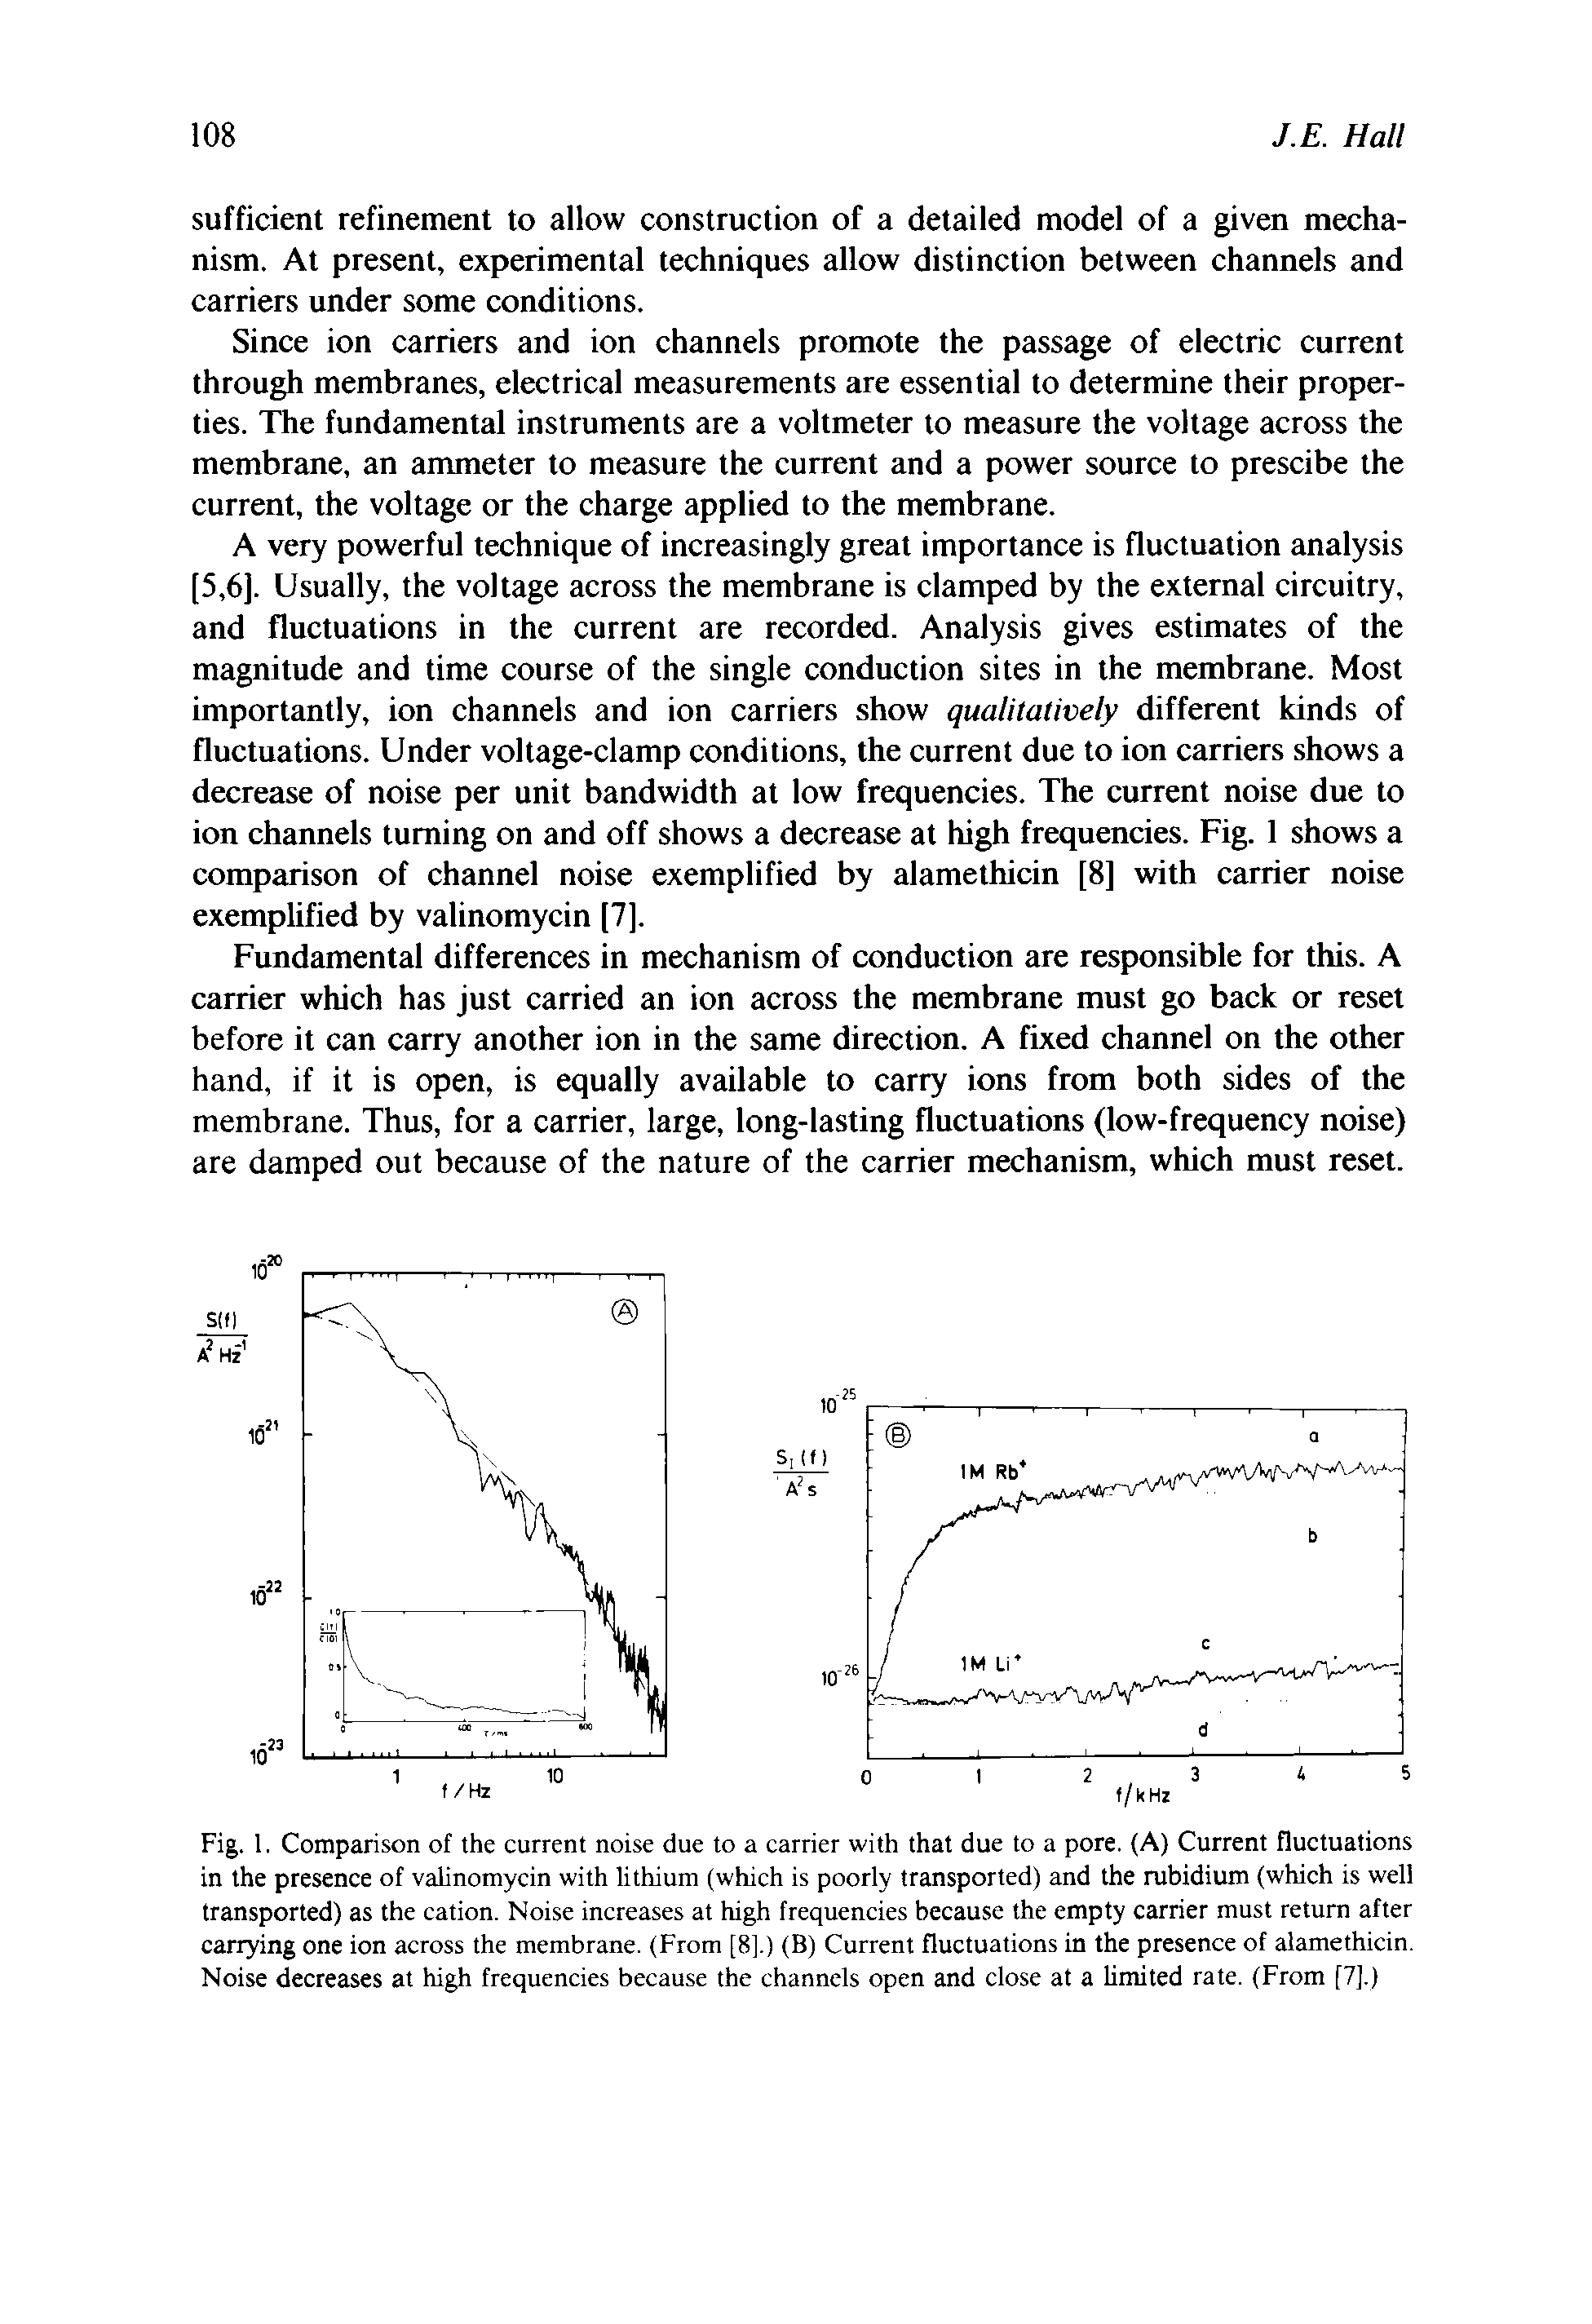 Fig. 1. Comparison of the current noise due to a carrier with that due to a pore. (A) Current fluctuations in the presence of valinomycin with lithium (which is poorly transported) and the rubidium (which is well transported) as the cation. Noise increases at high frequencies because the empty carrier must return after carrying one ion across the membrane. (From [8].) (B) Current fluctuations in the presence of alamethicin. Noise decreases at high frequencies because the channels open and close at a limited rate. (From [7].)...